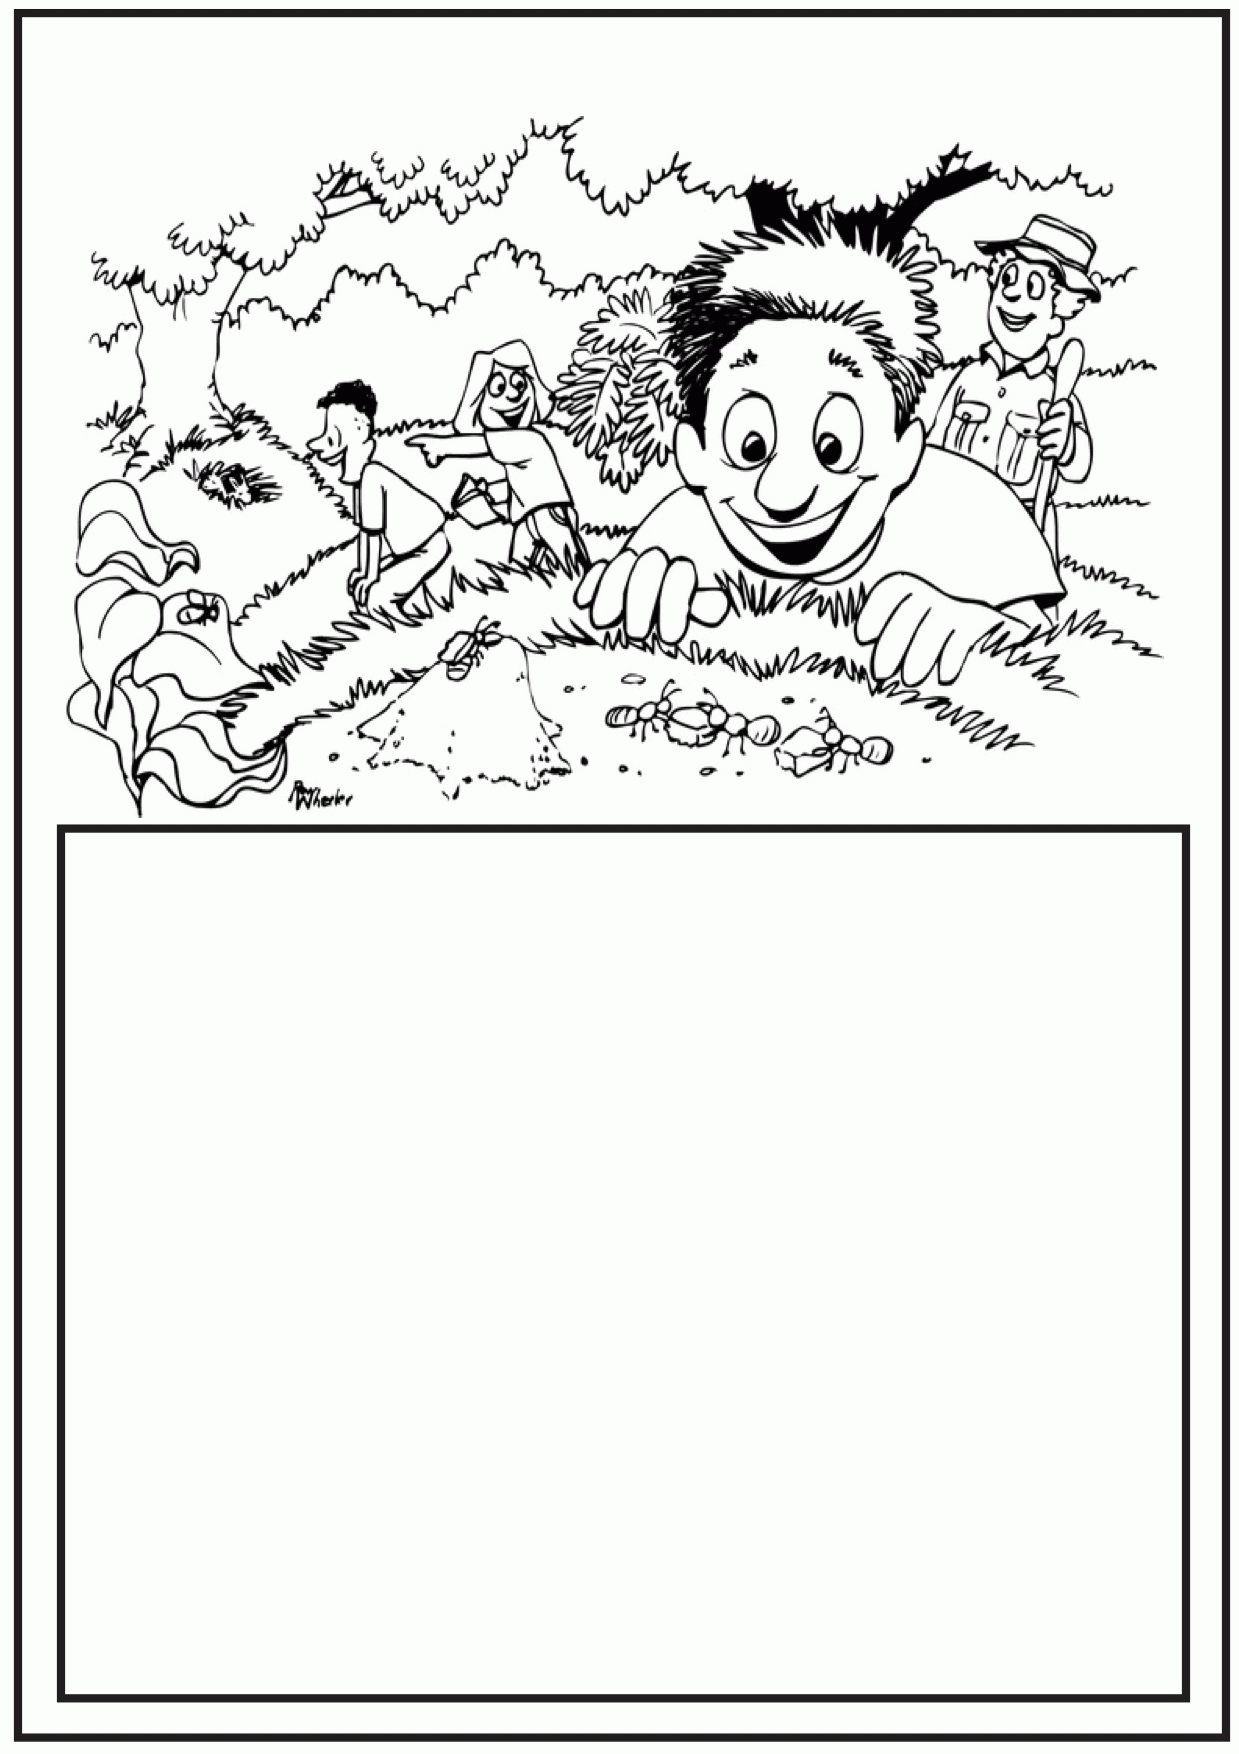 Ant Coloring Pages and Classroom activities